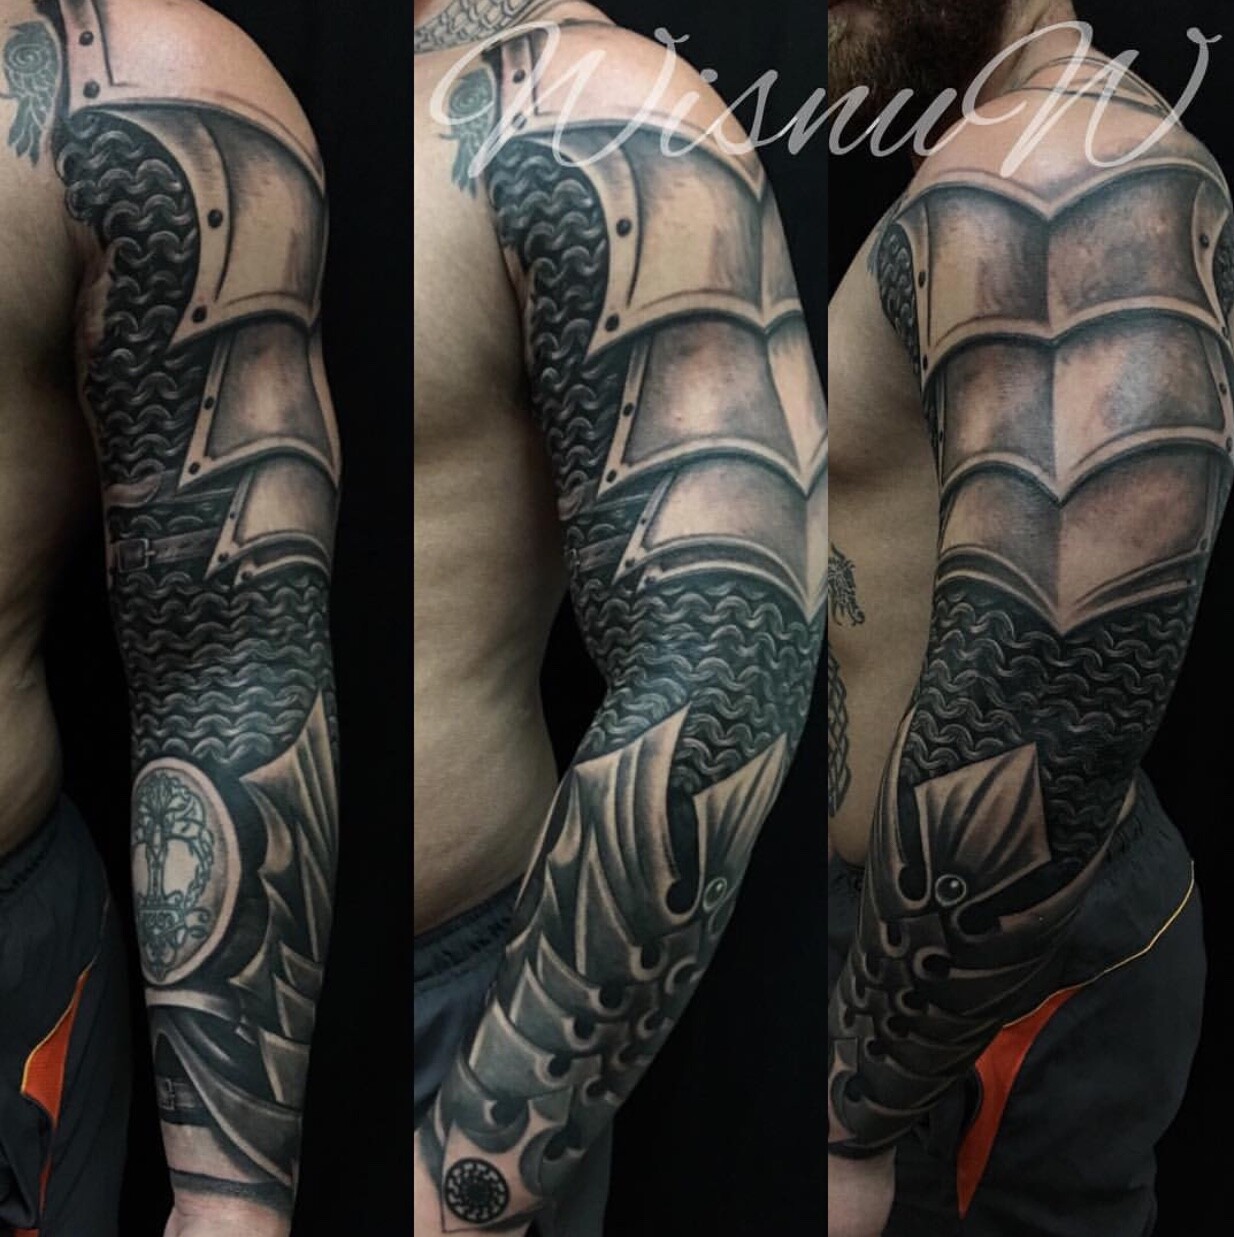 Details more than 68 armor tattoo sleeve best  thtantai2